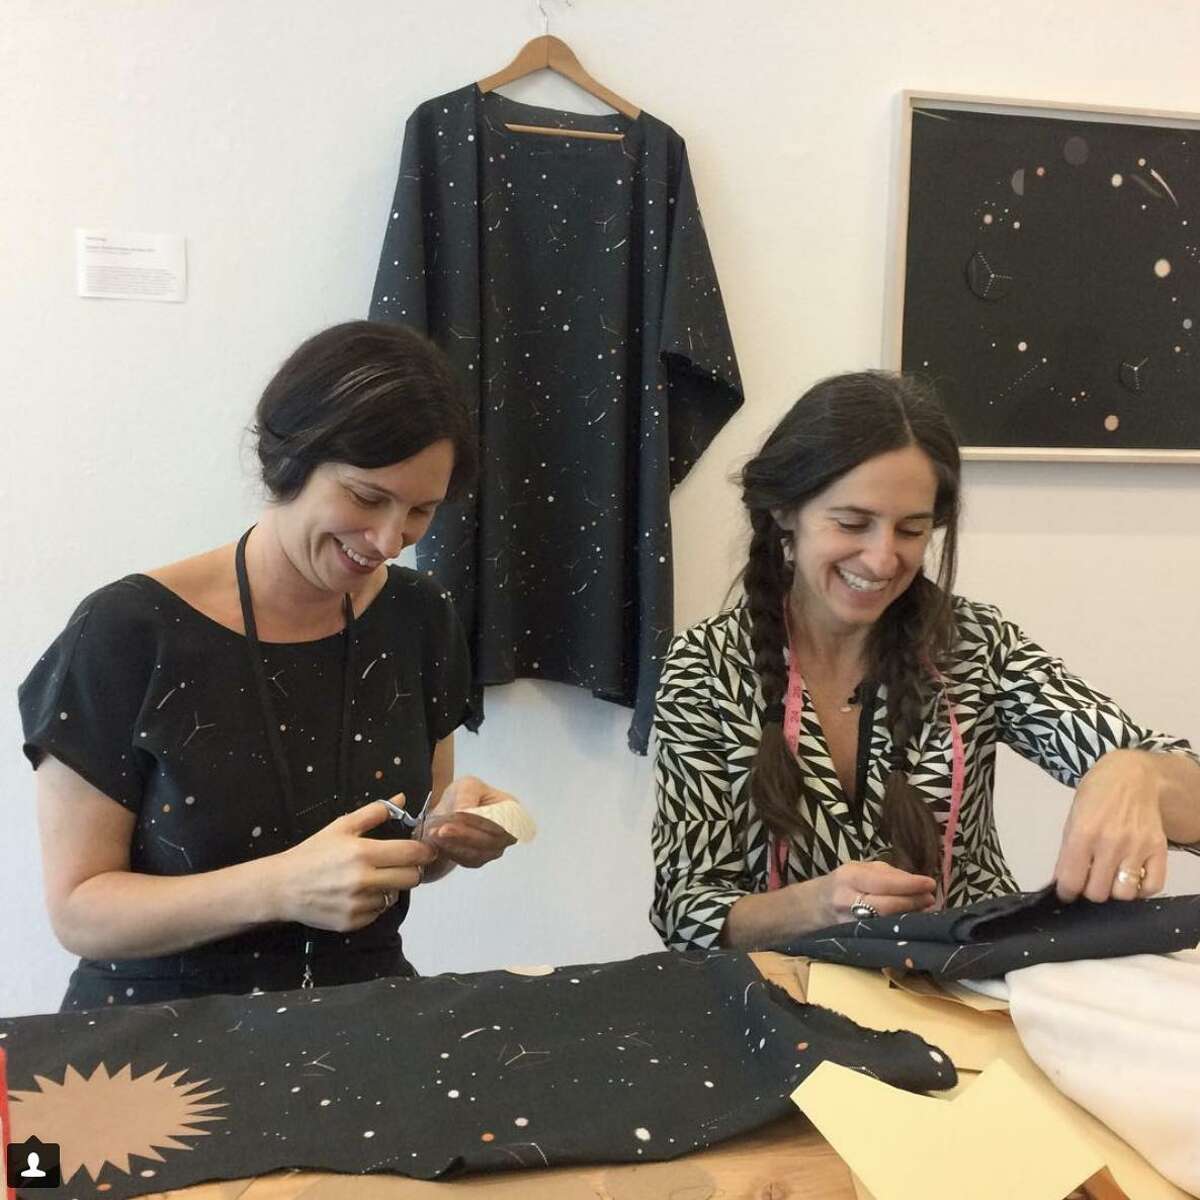 Lena Wolff (left) and Erica Tanov work on a clothing collection based on a collage Wolff created for the de Young.